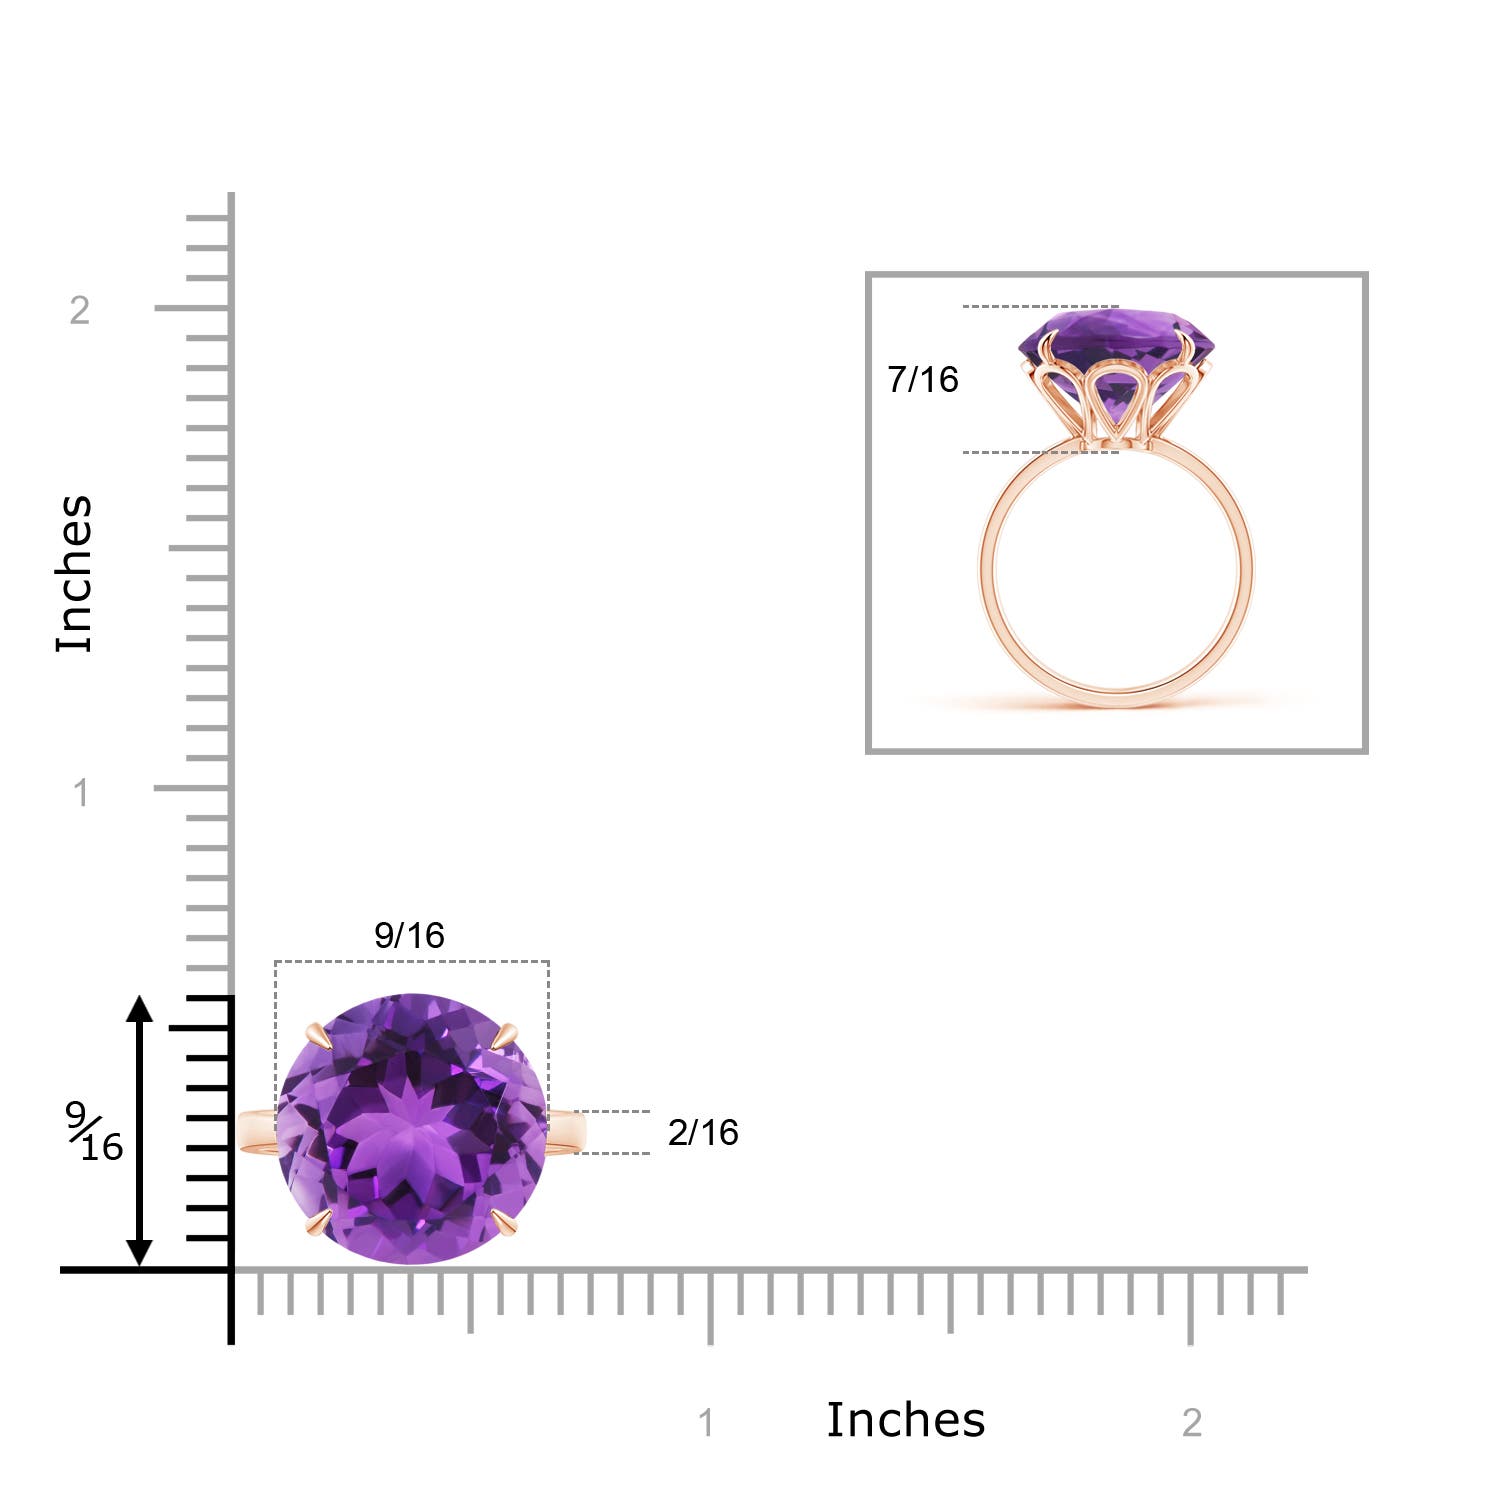 AAA- Amethyst / 11 CT / 14 KT Rose Gold